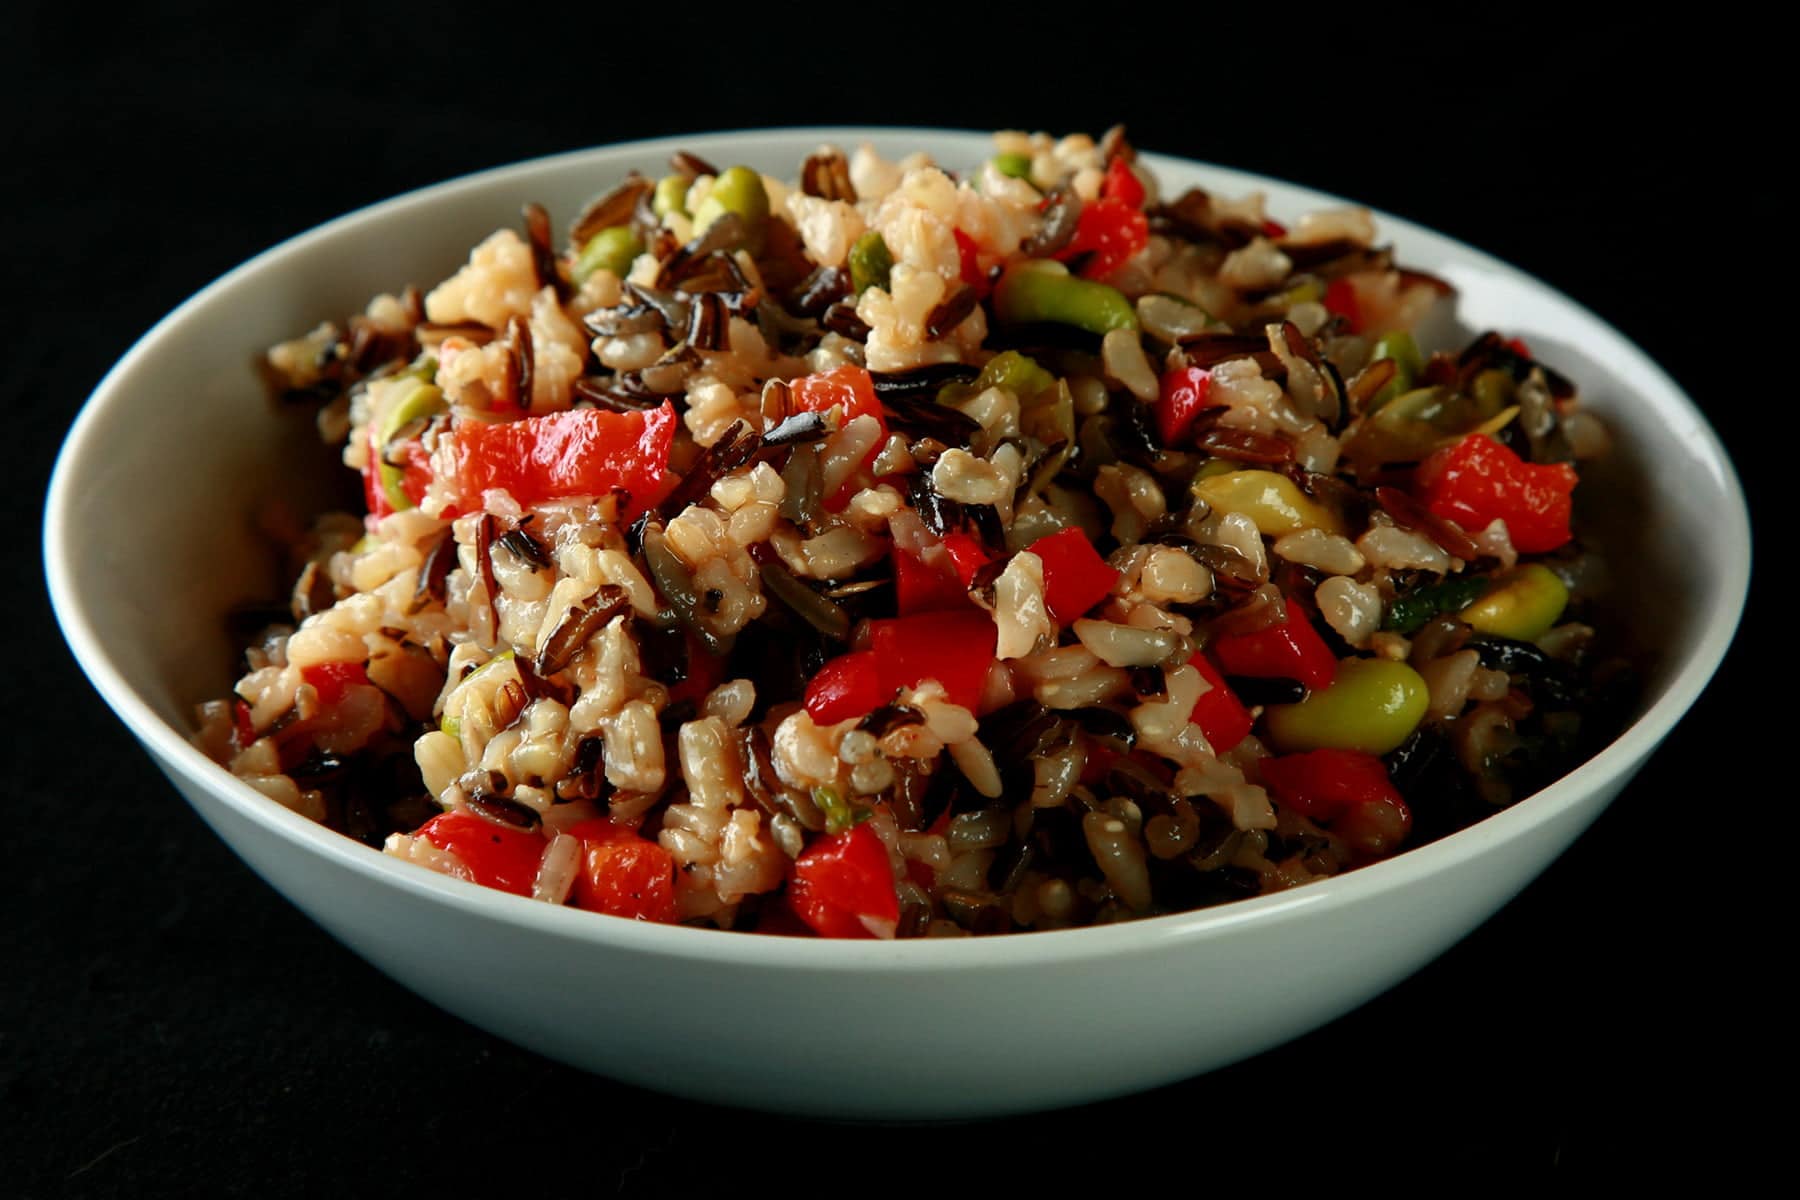 A bowl of wild rice and edamame salad. Wild rice, edamame, and red peppers are all visible.